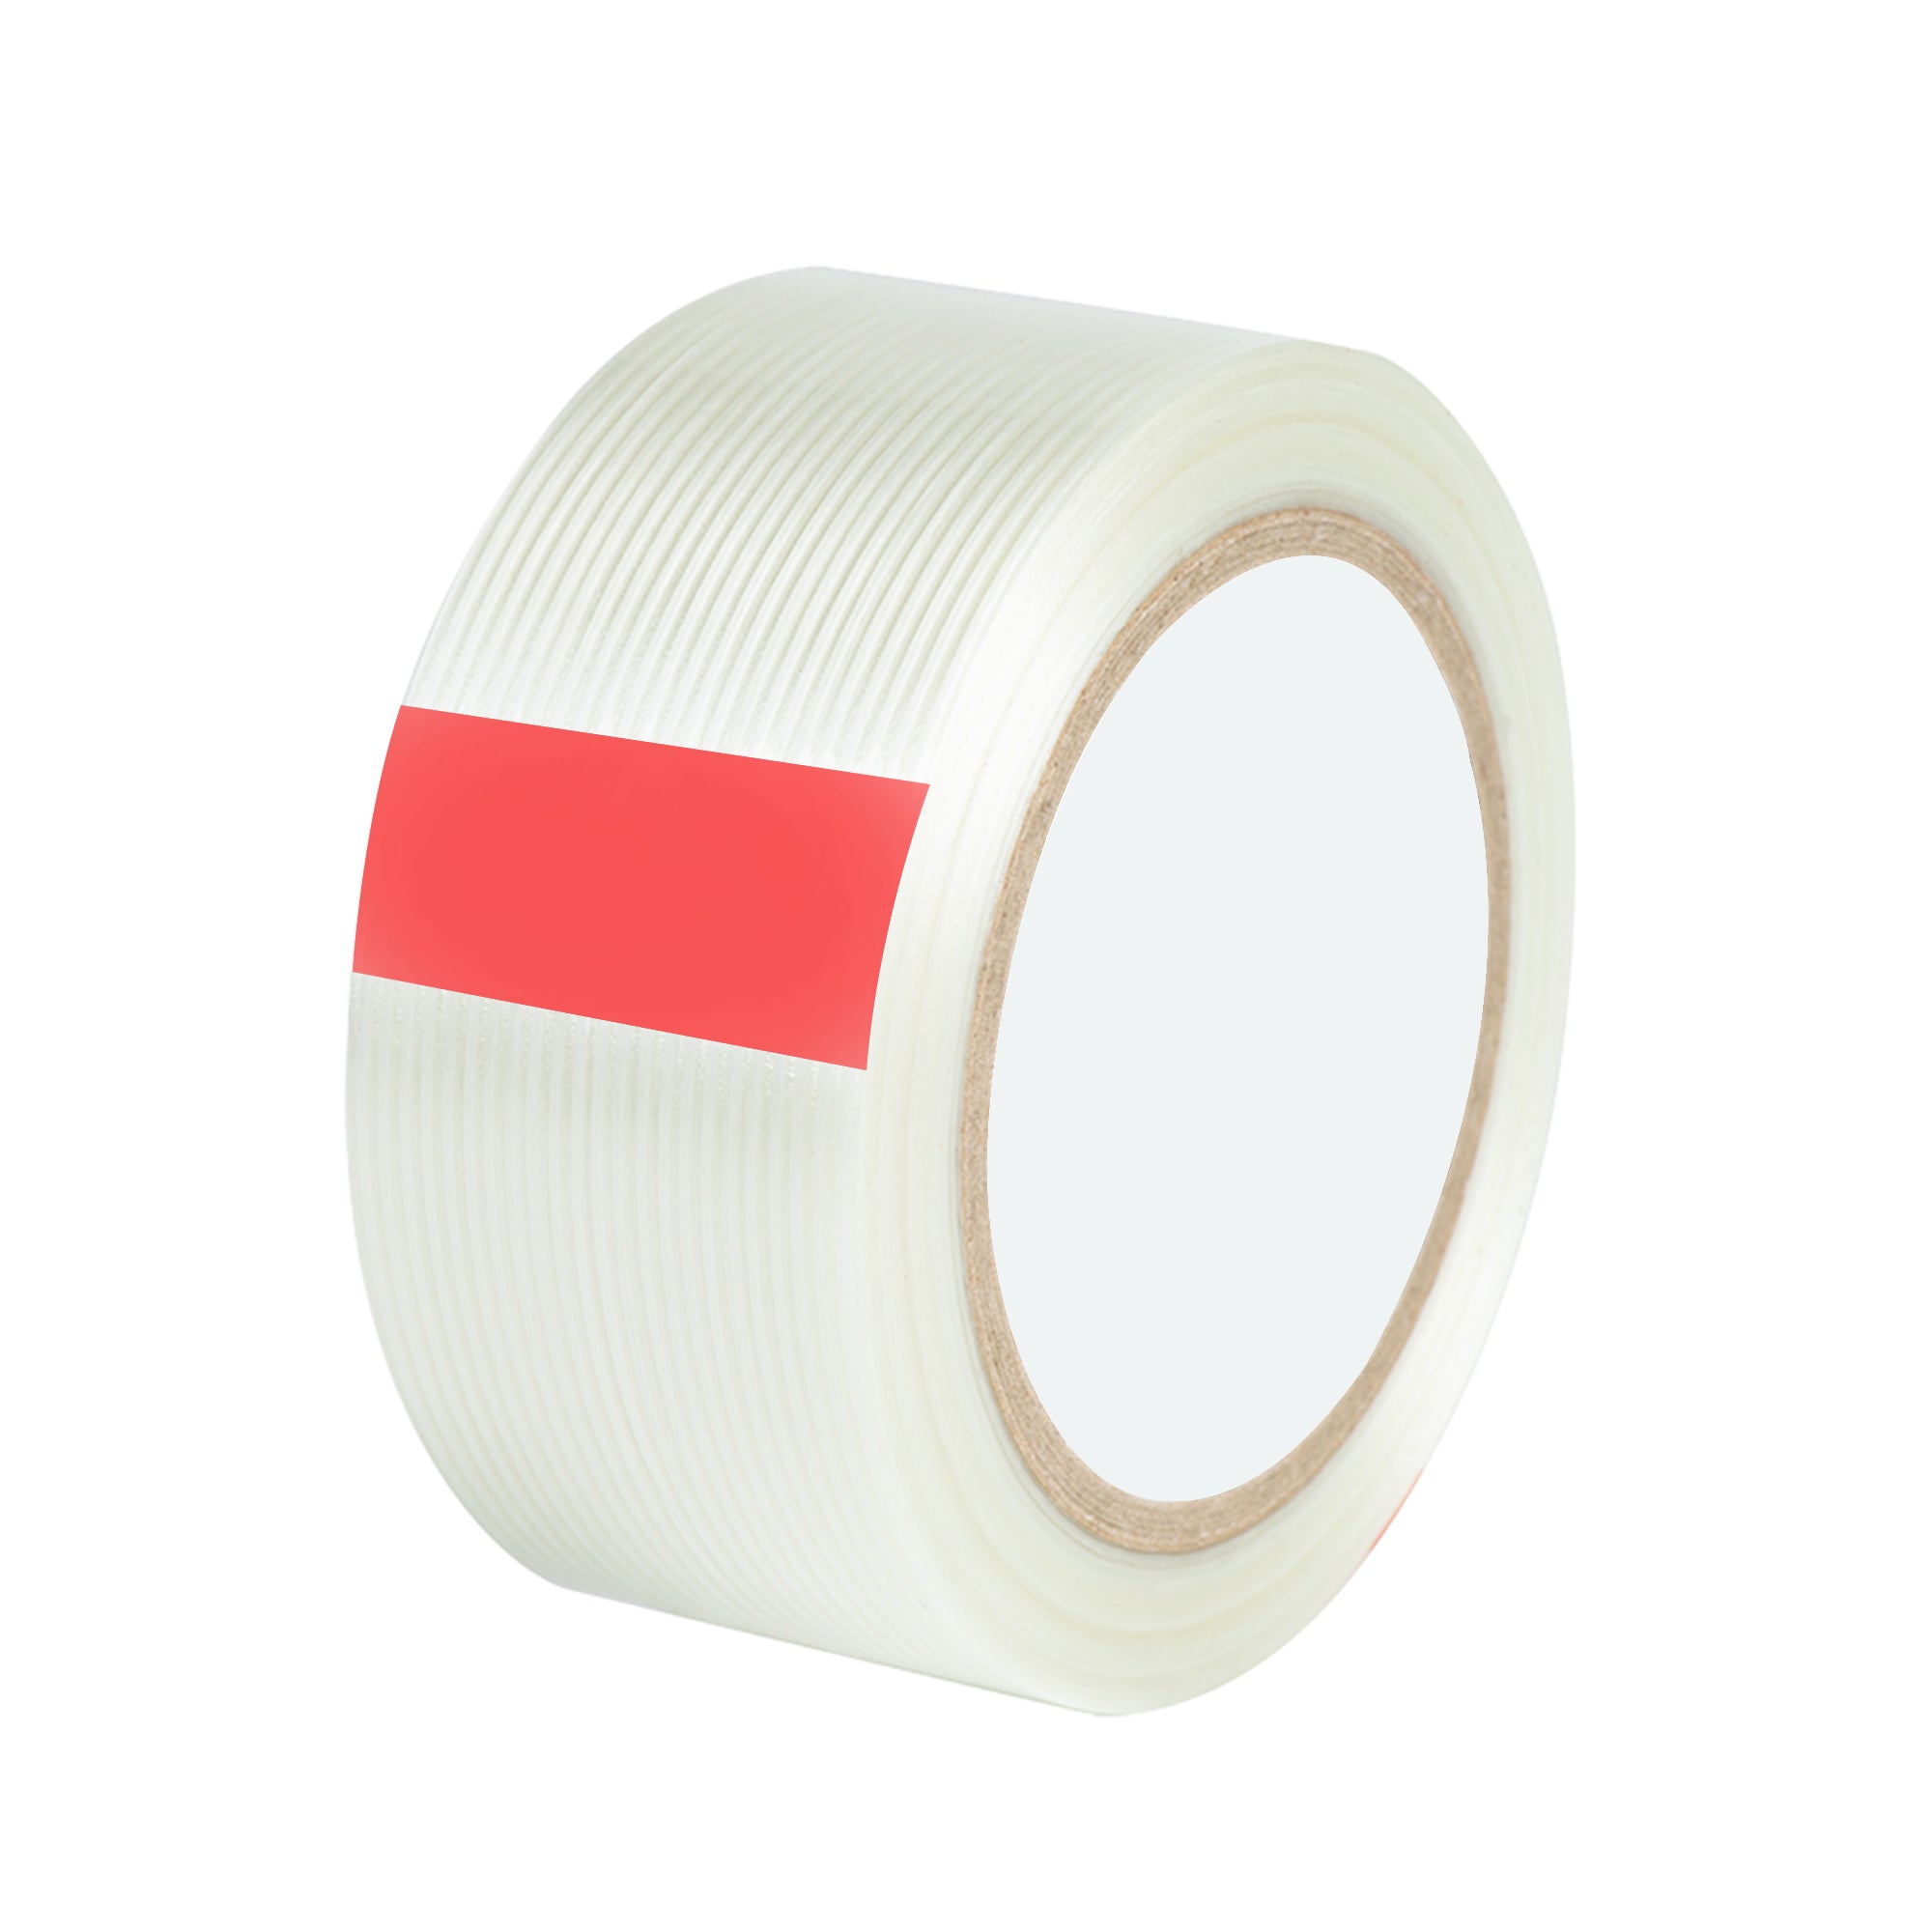 1566 Transparent Strong Tape Rolls for Multipurpose Packing Use DeoDap